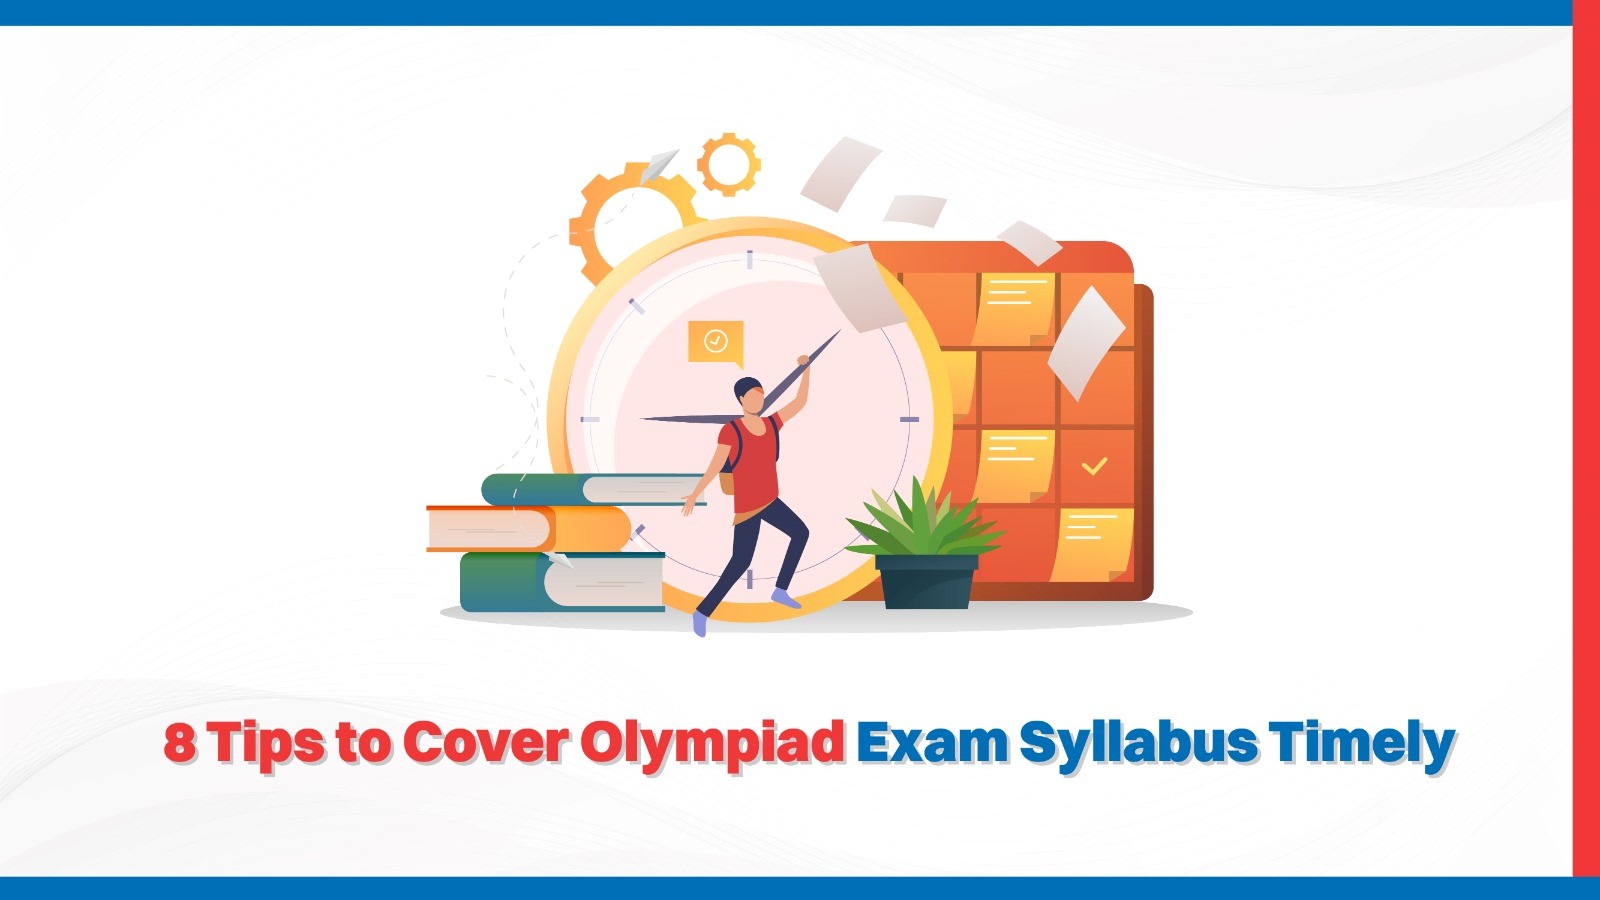 8 Tips to Cover Olympiad Exam Syllabus Timely.jpg